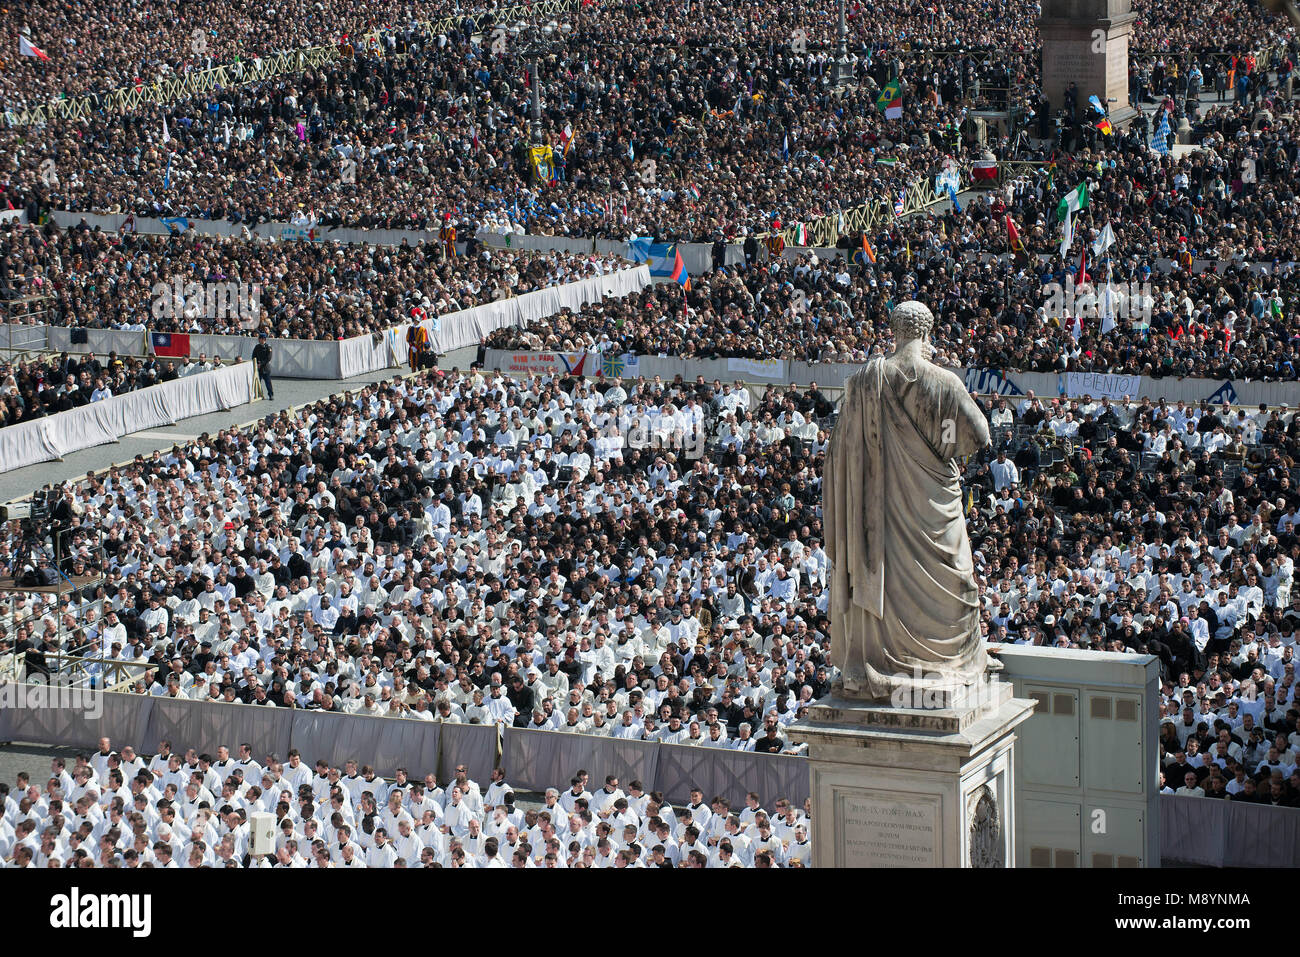 Vatican City. St Peter's square during Pope Francis' grandiose inauguration mass on March 19, 2013 at the Vatican. Stock Photo